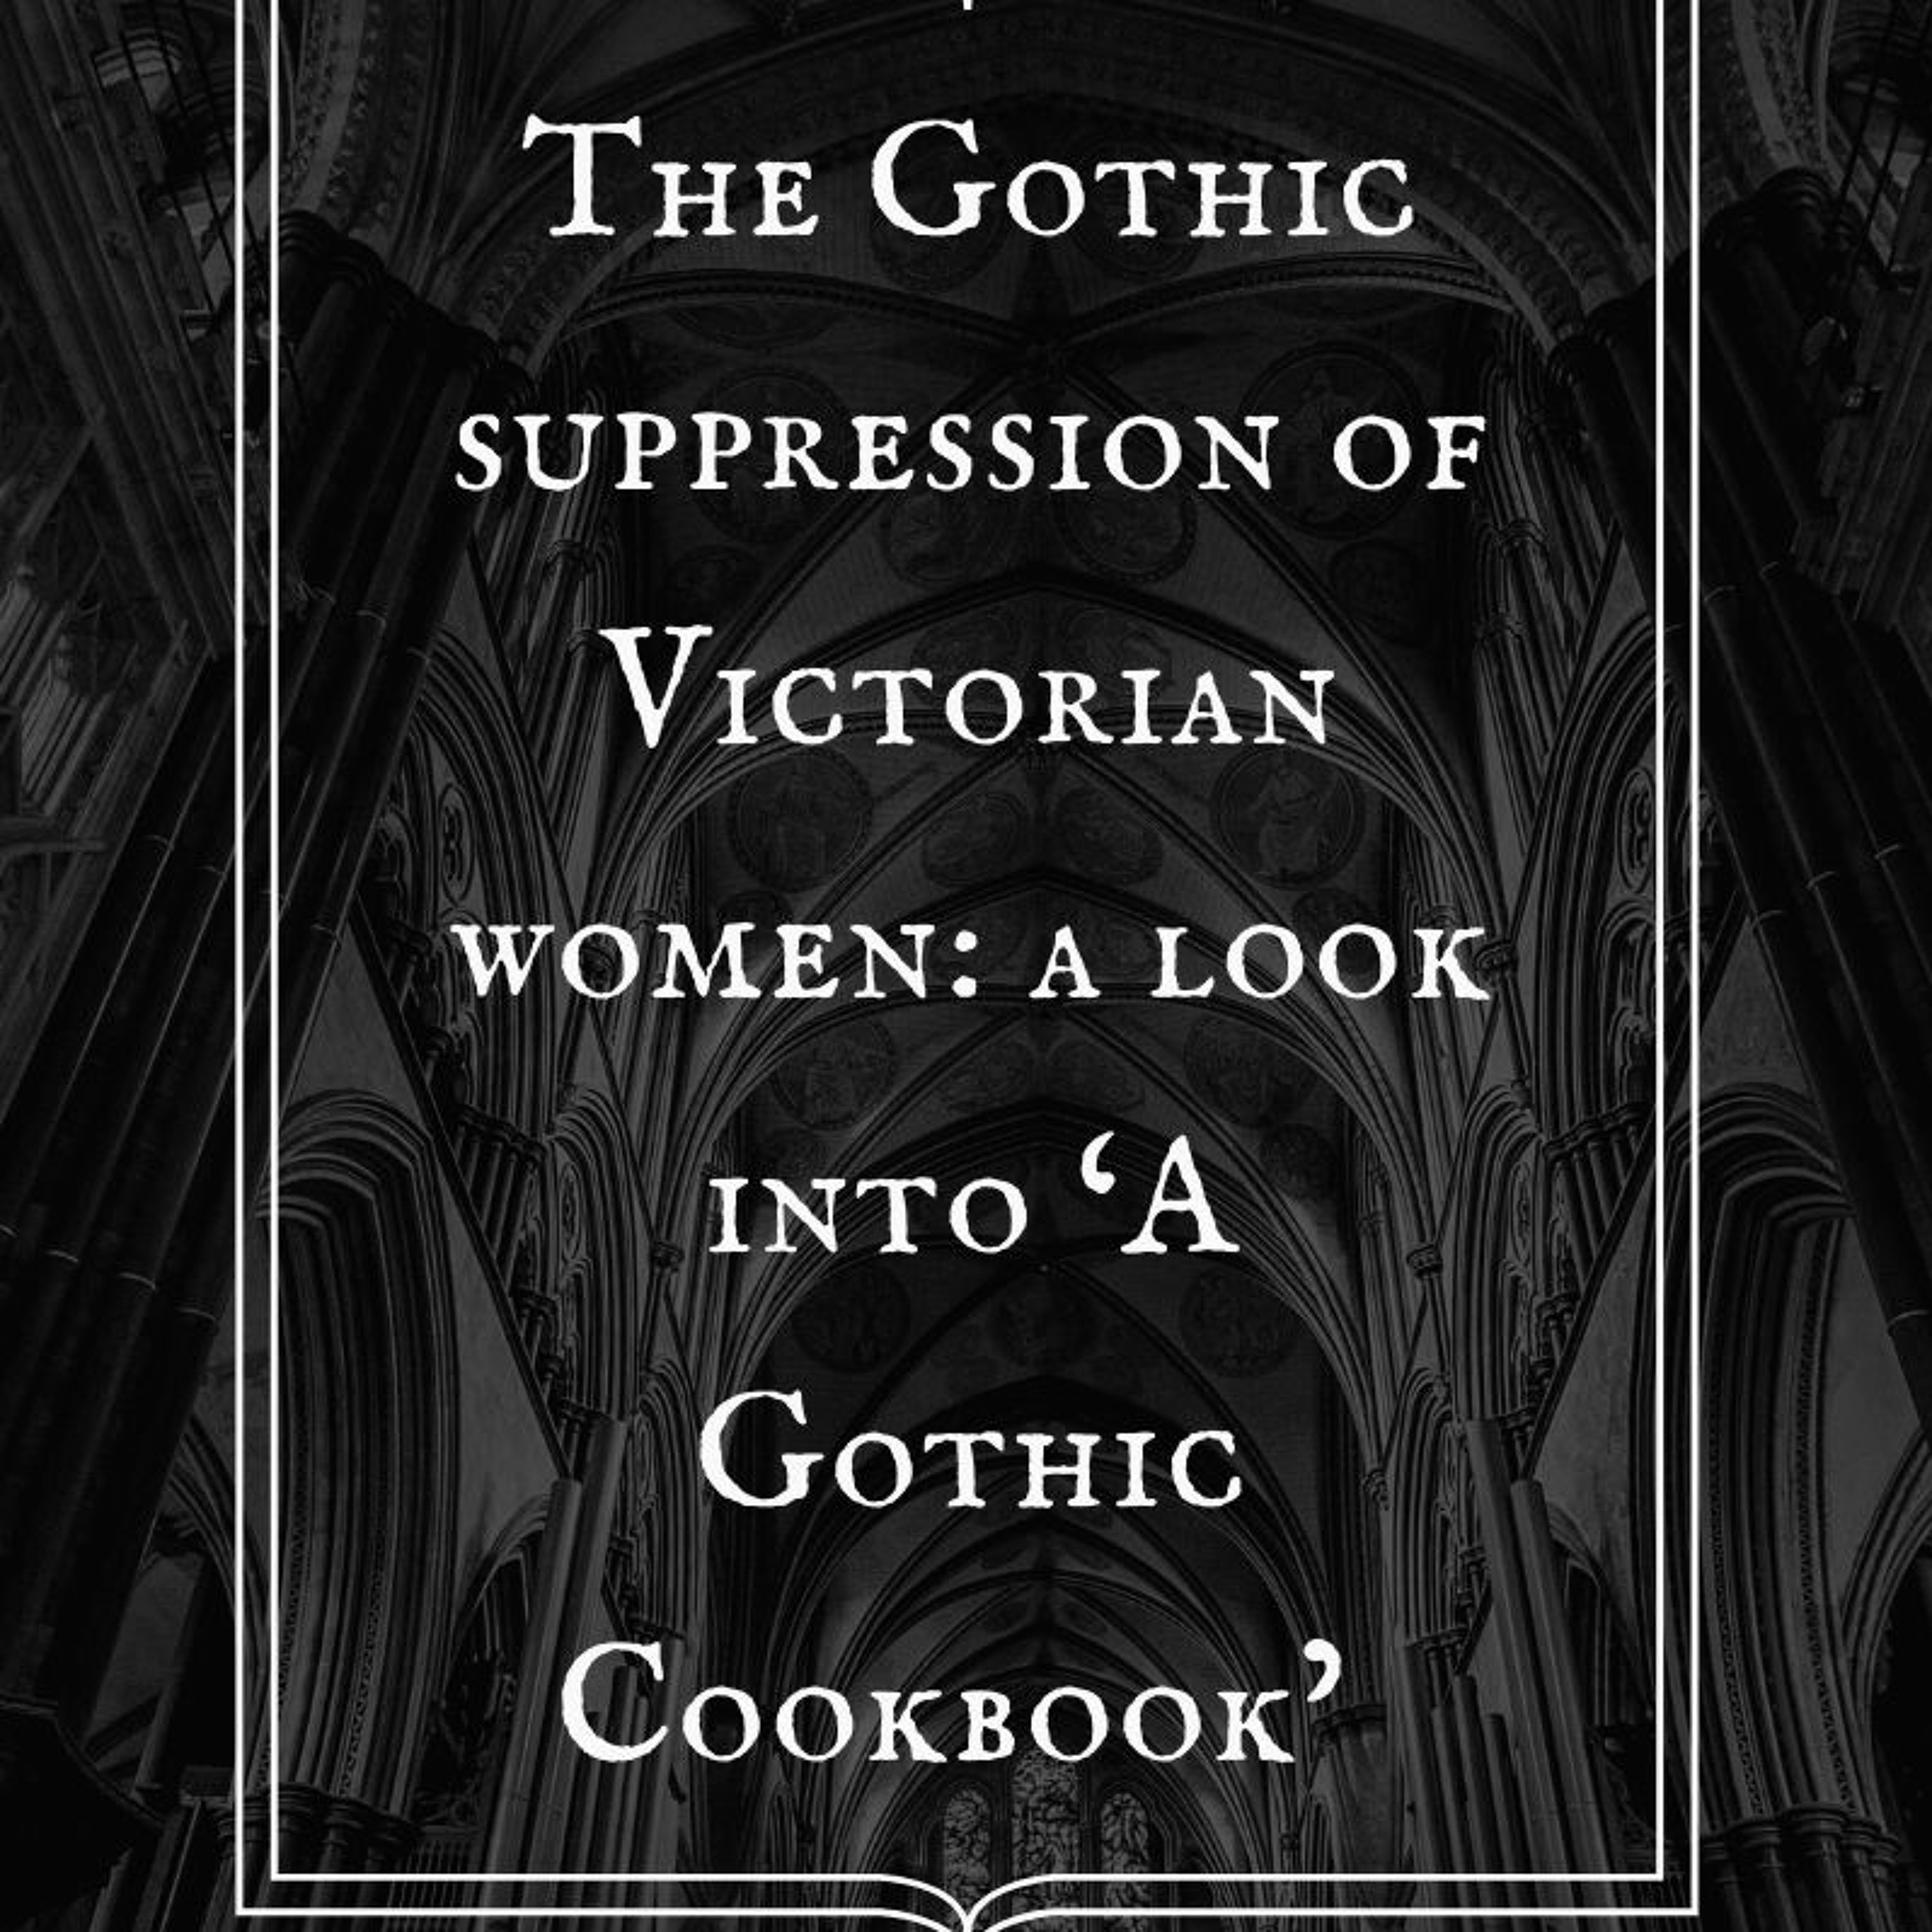 Ep. 31: The Gothic suppression of Victorian women: a look into ‘A Gothic Cookbook’